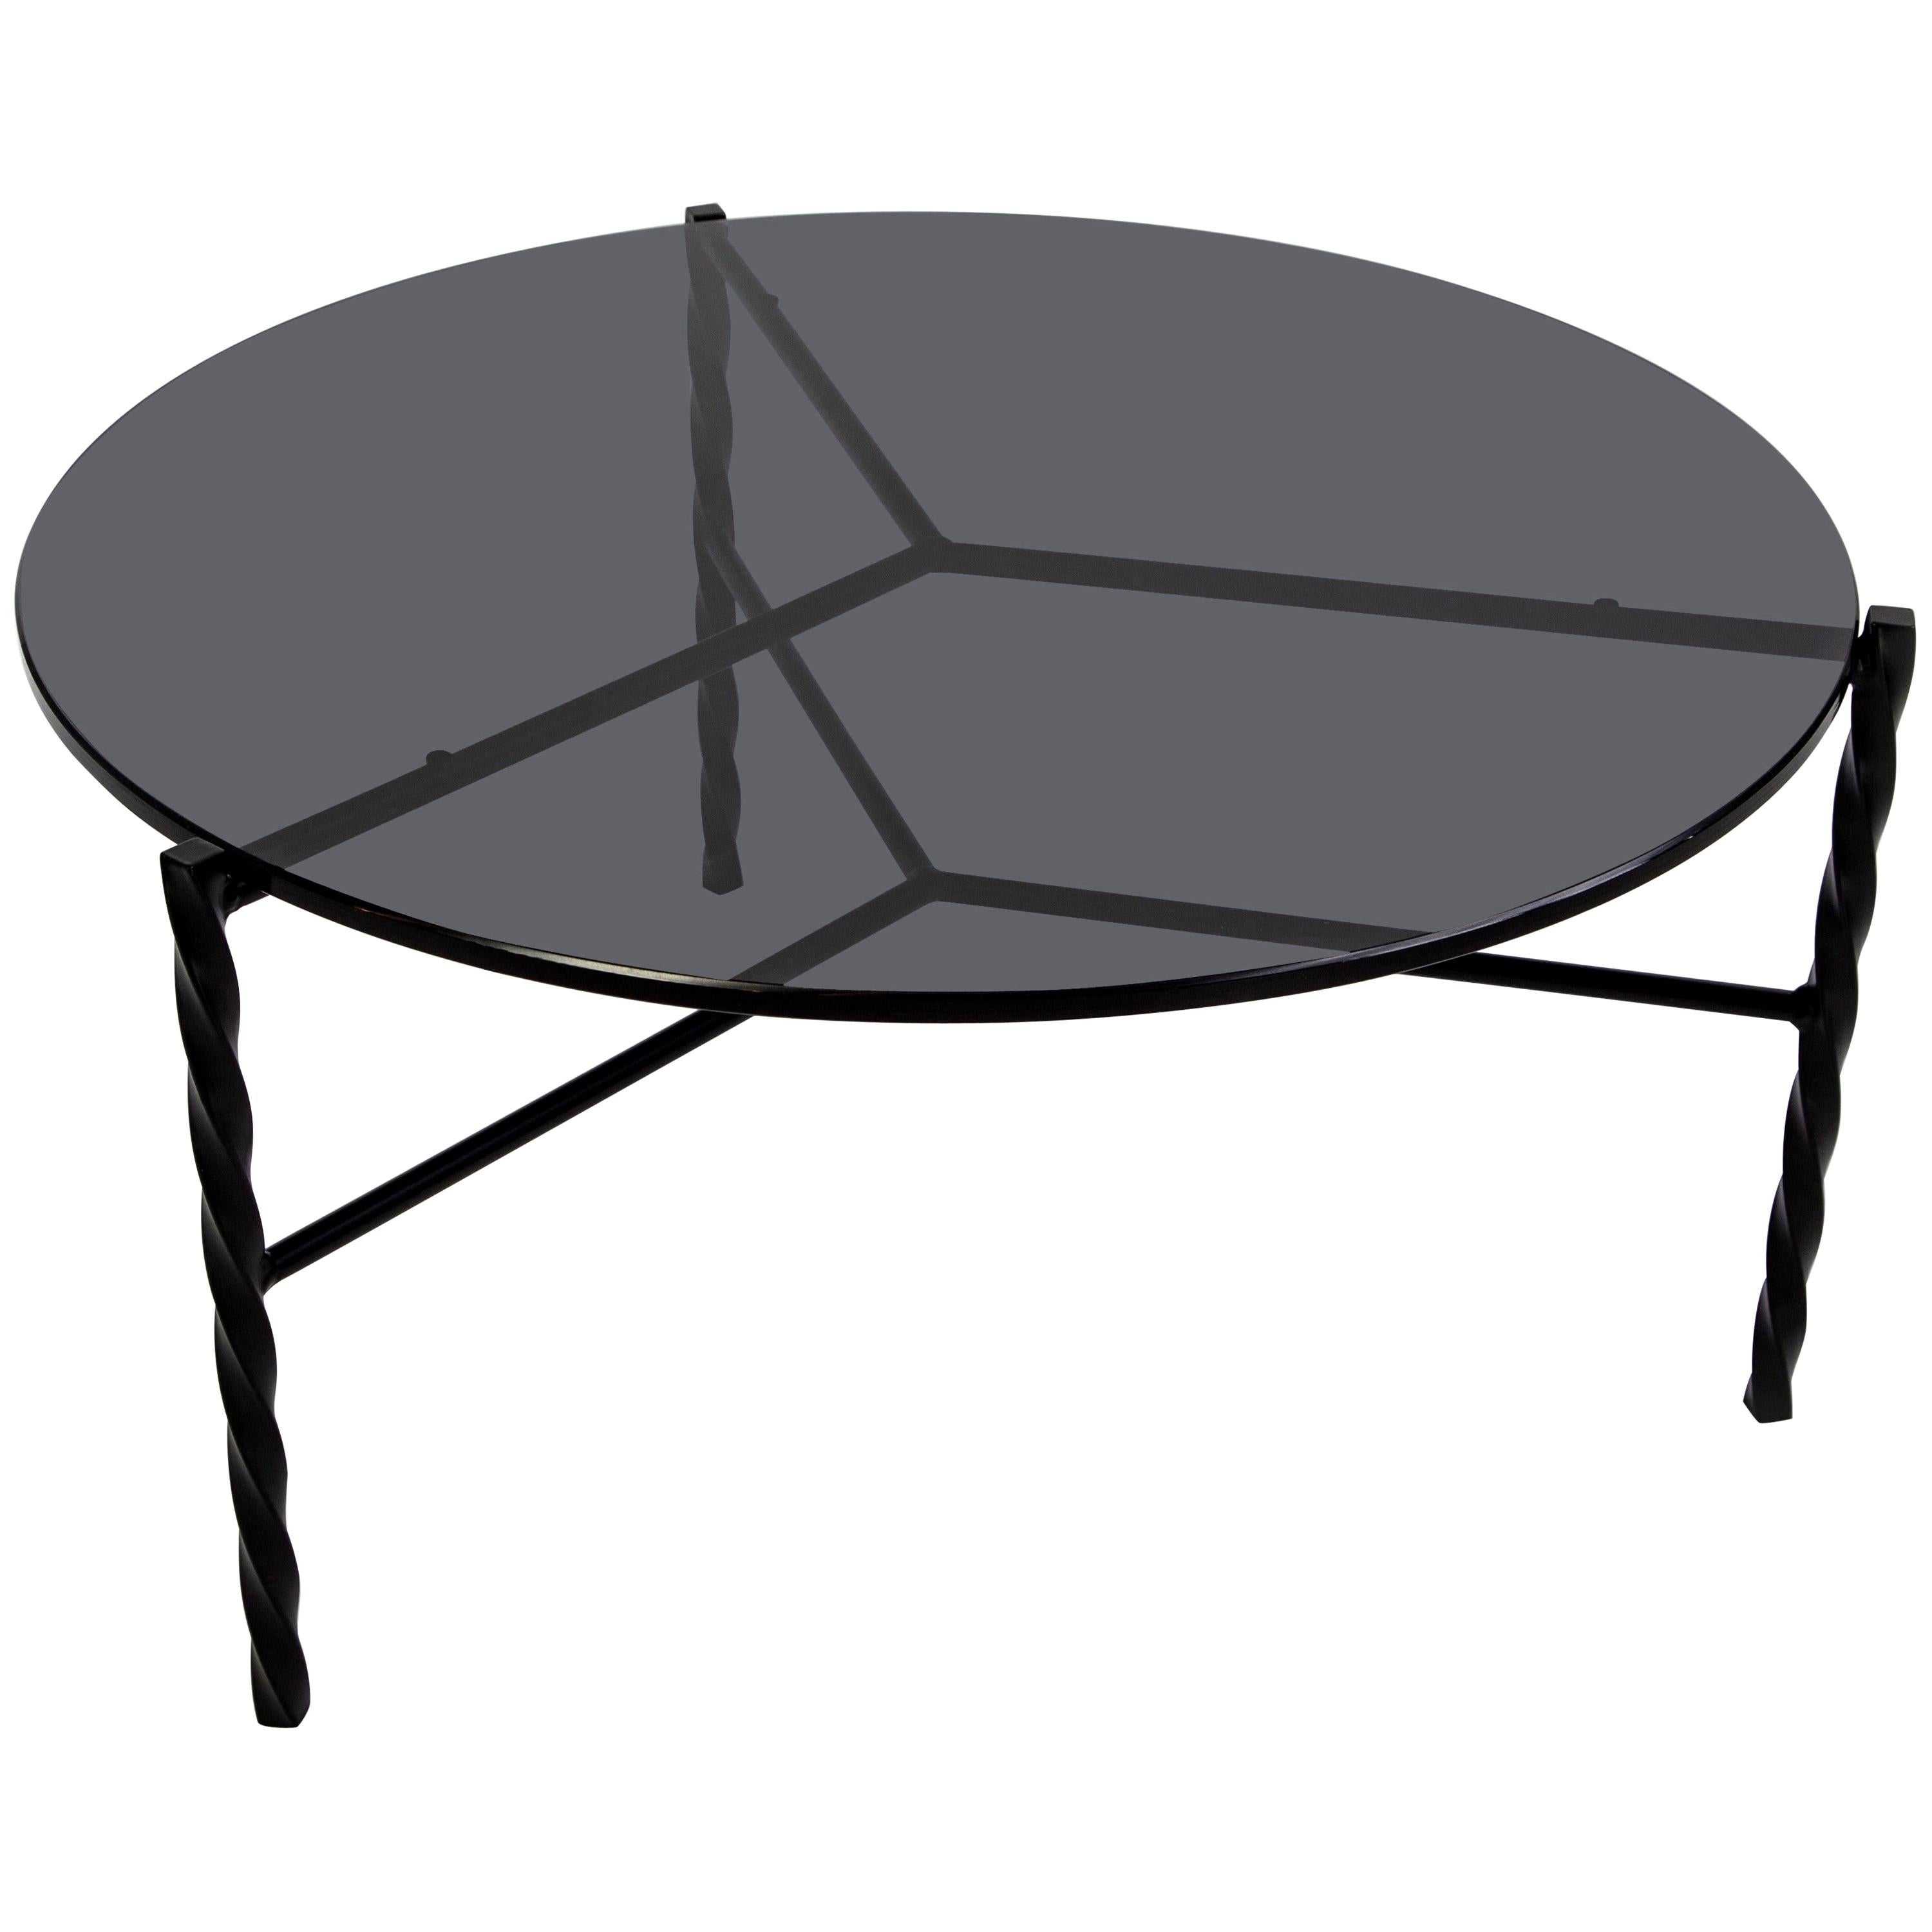 Von Iron Coffee Table from Souda, Black and Glass, Floor Model